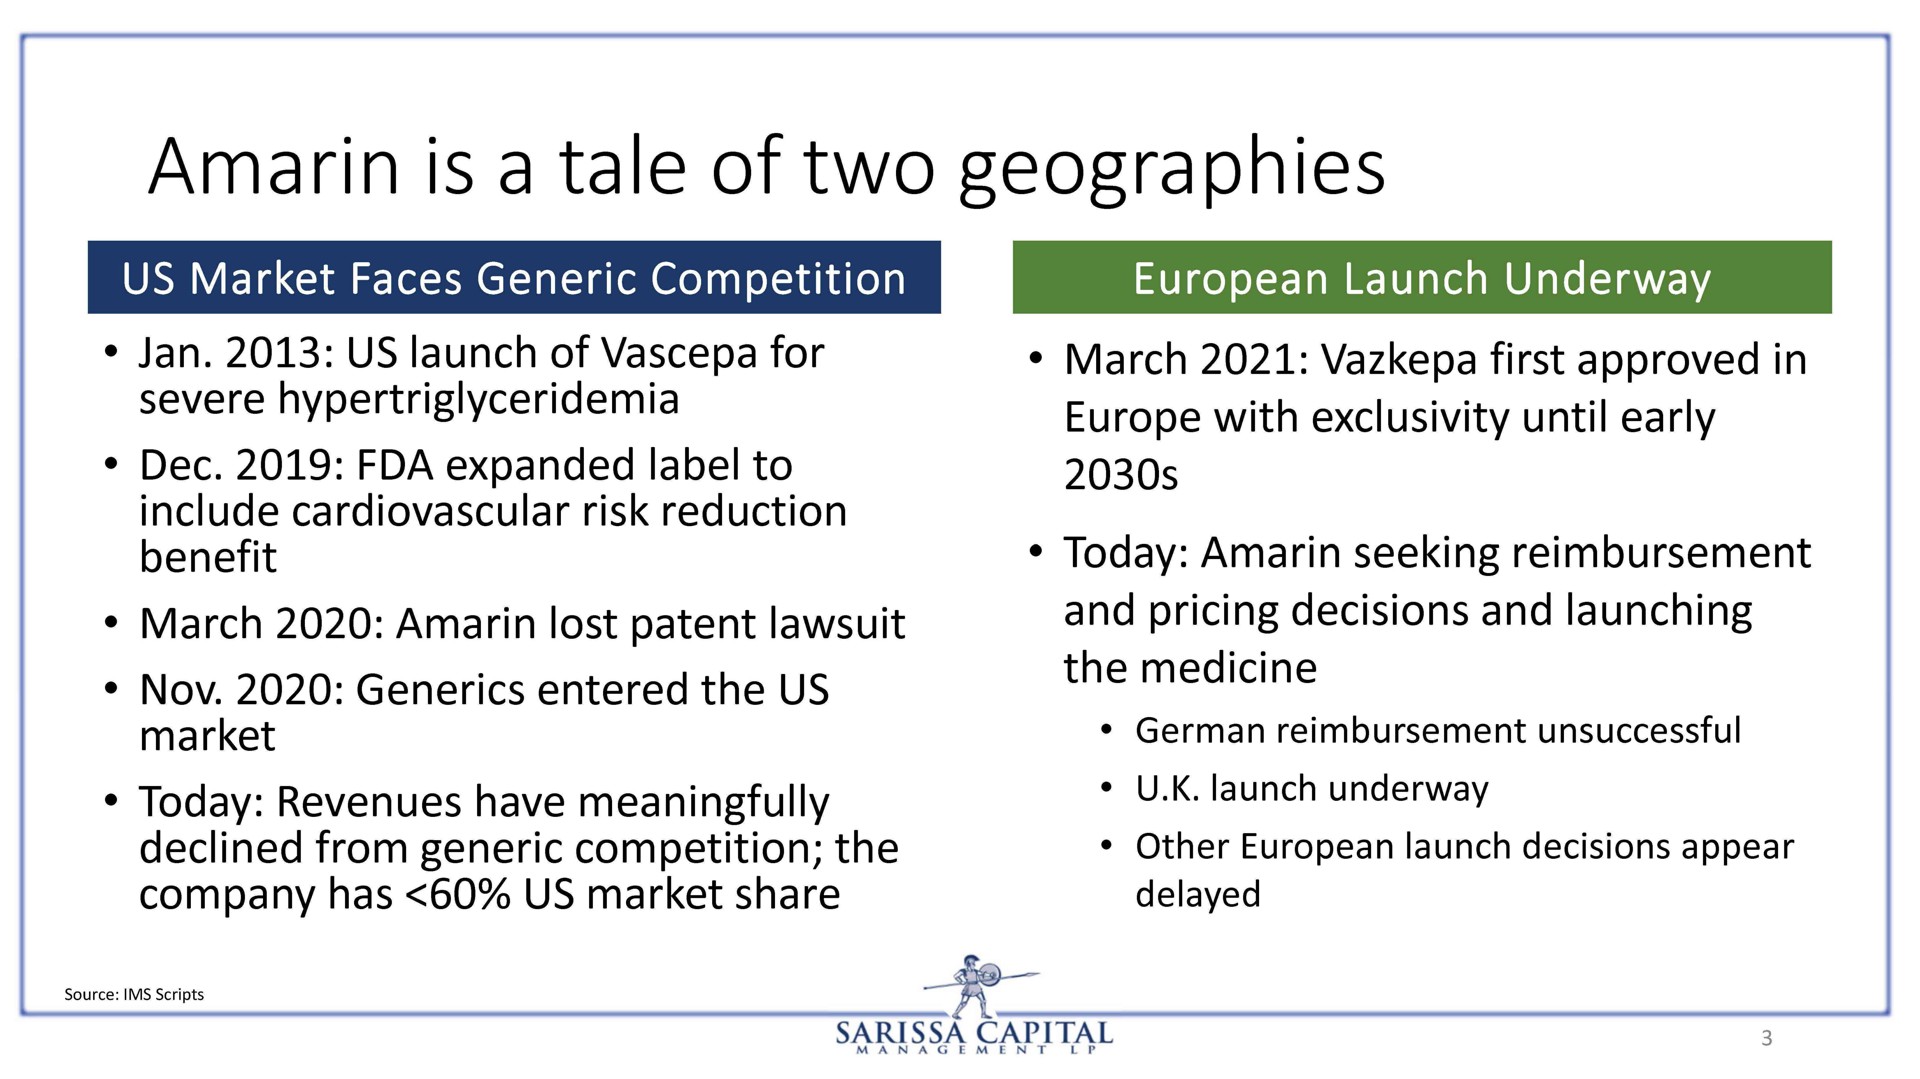 amarin is a tale of two geographies | Sarissa Capital